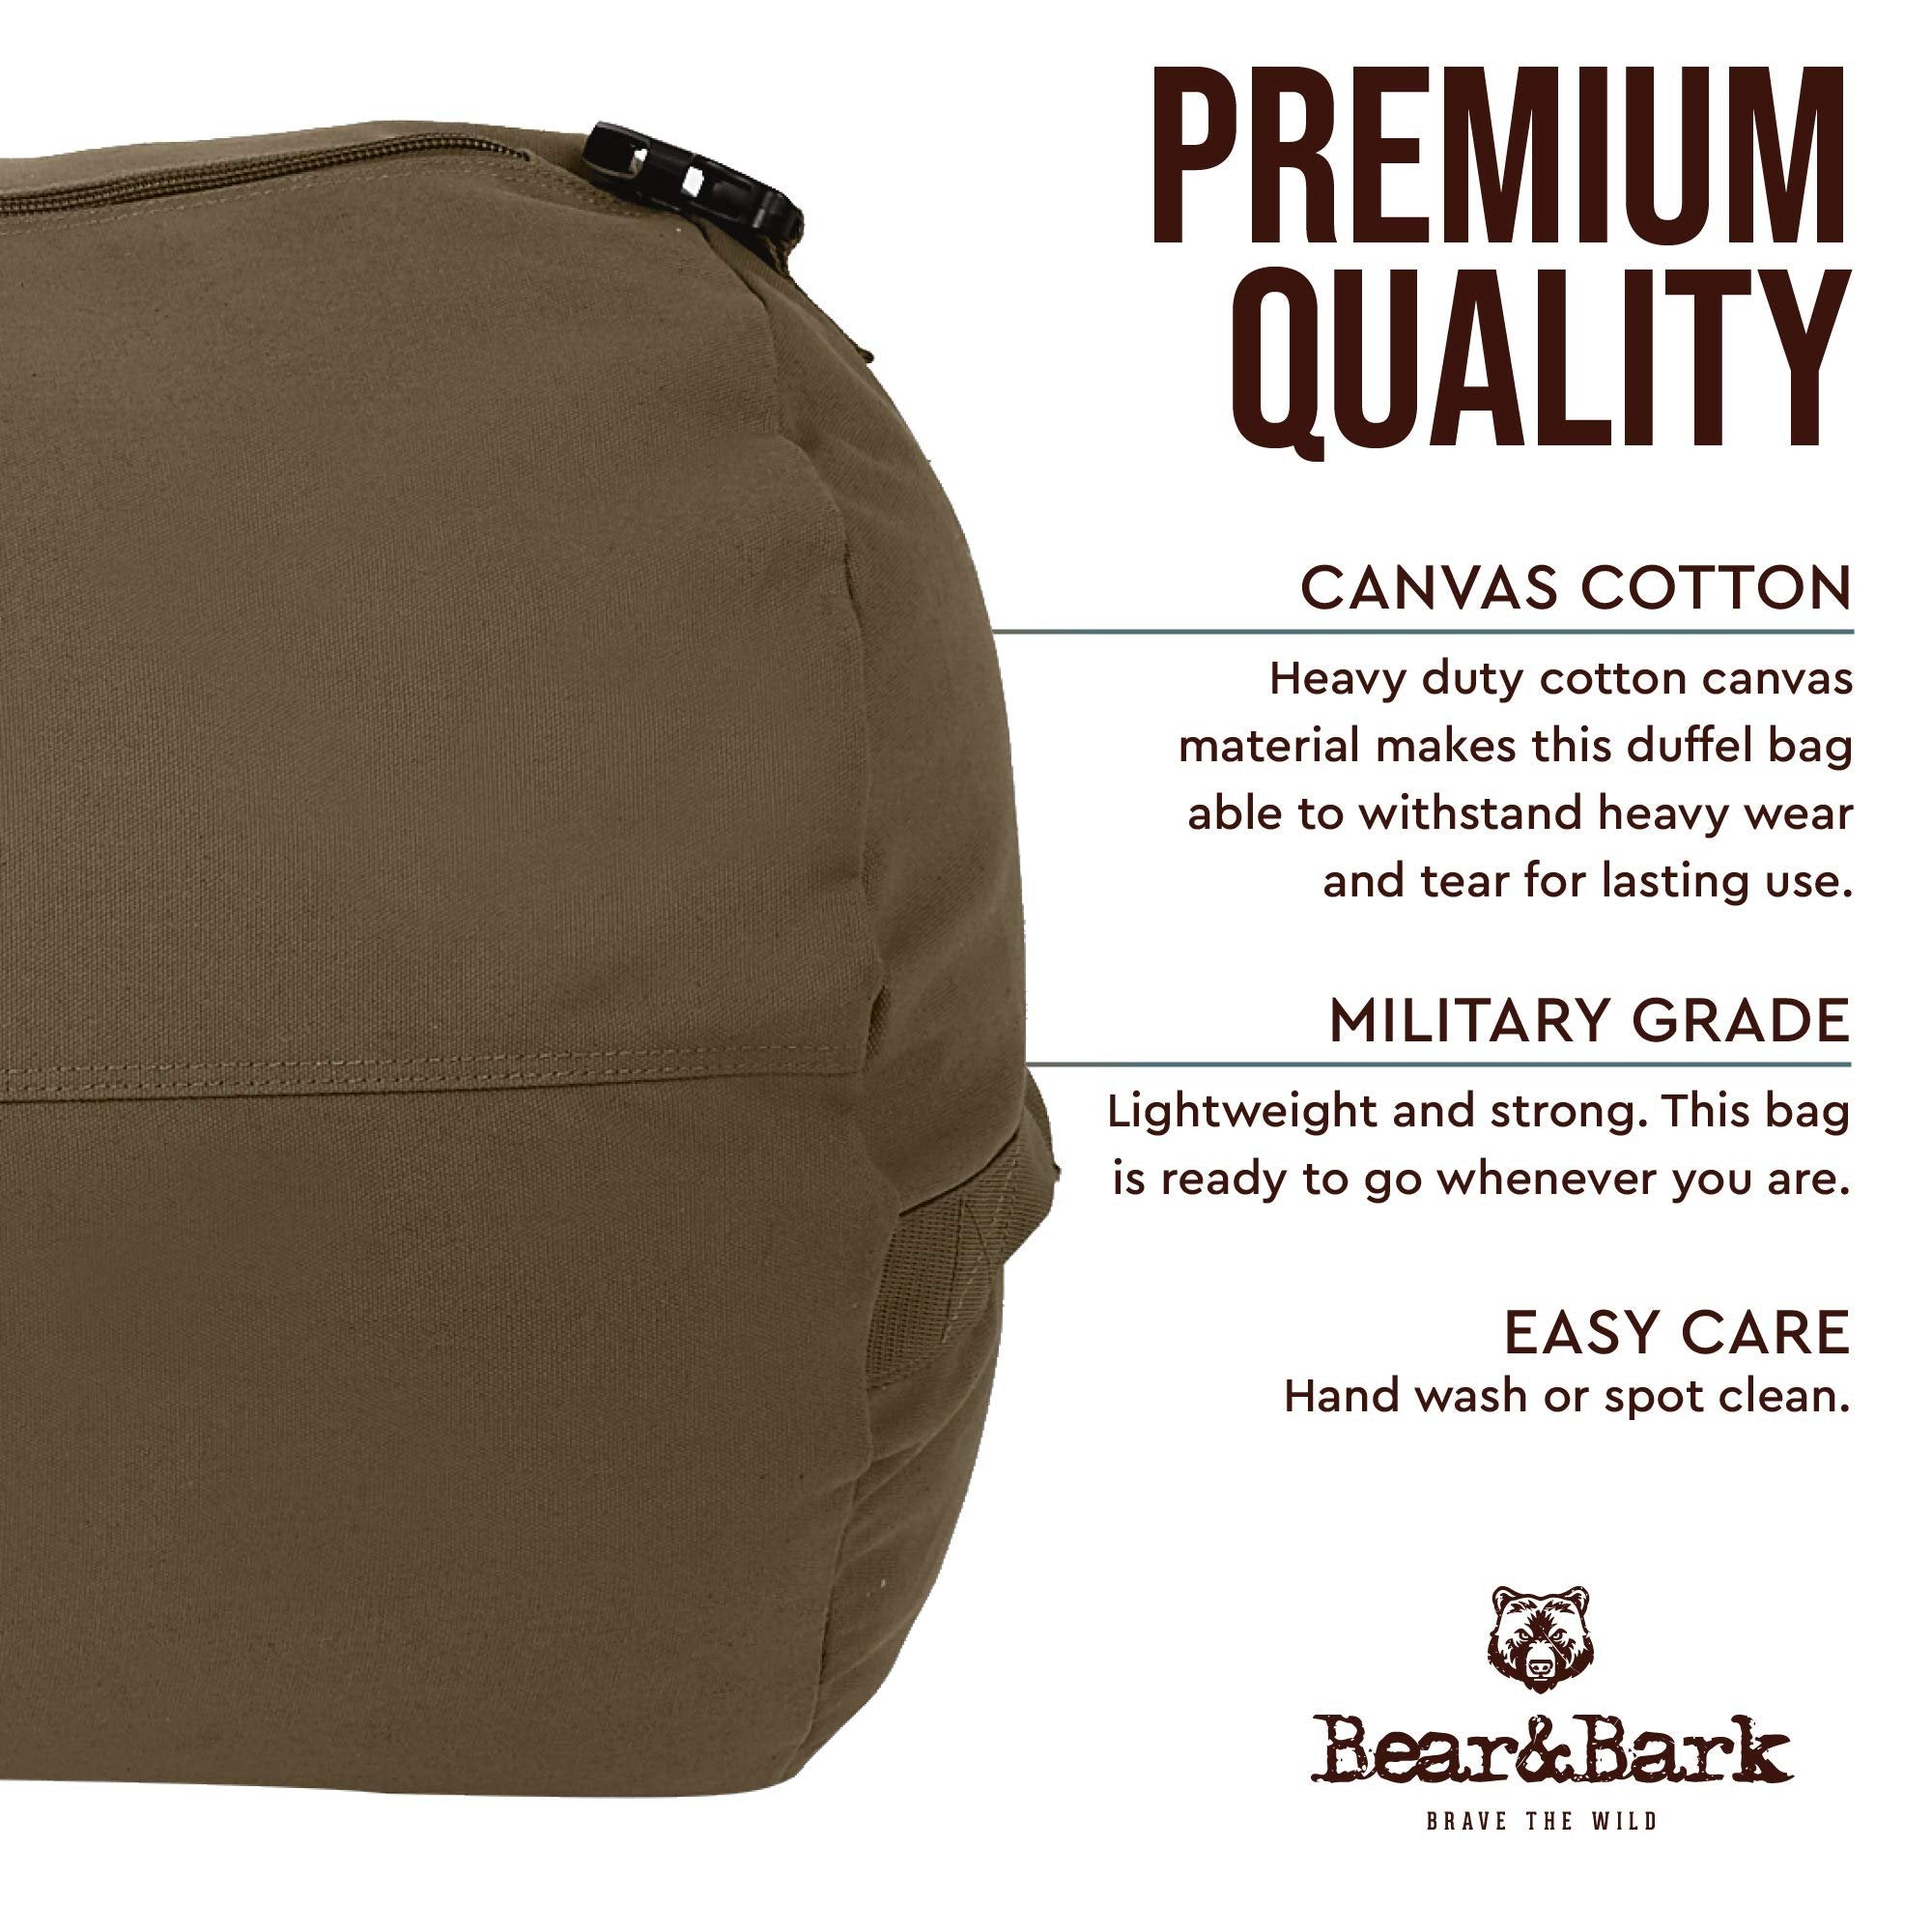 Bear&Bark Military Green Duffle Bag - Standard 32" X 18" - 133.4L Canvas Cargo Style Travel Luggage for Men and Women - Hiking, Student, Backpacking, Storage Shoulder Tote Bag